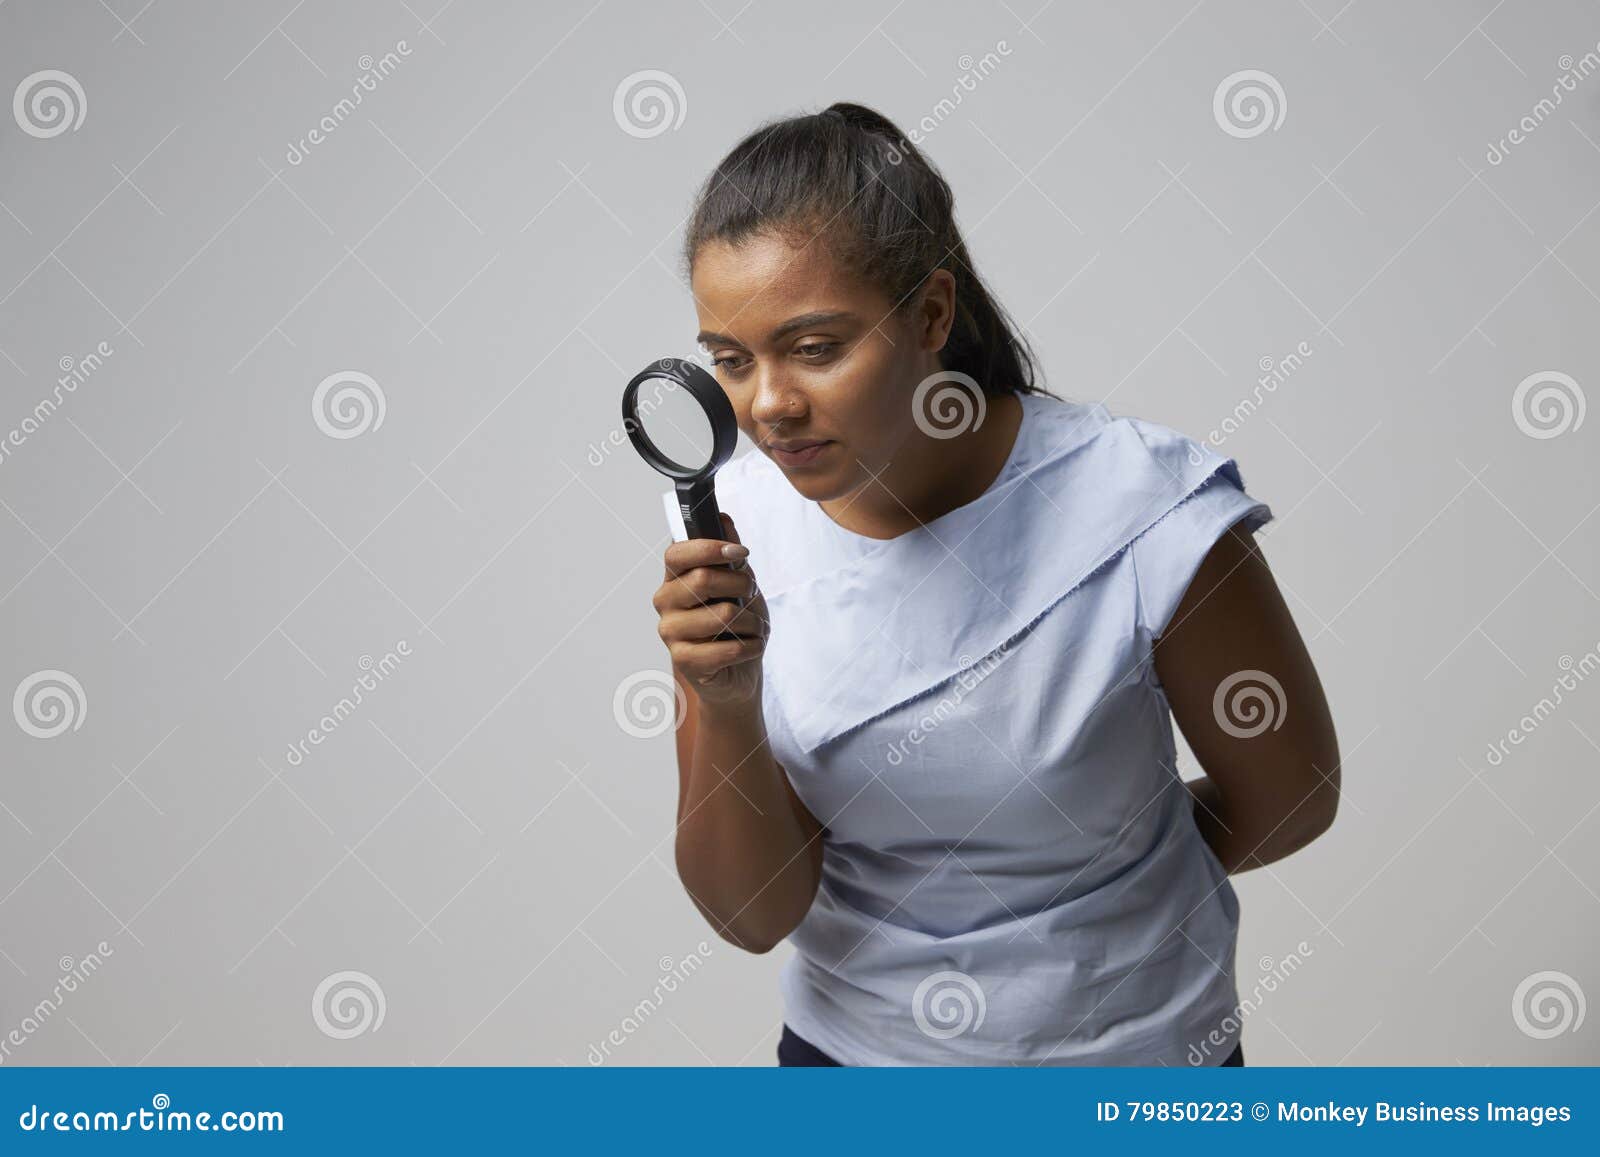 portrait of female criminologist with magnifying glass